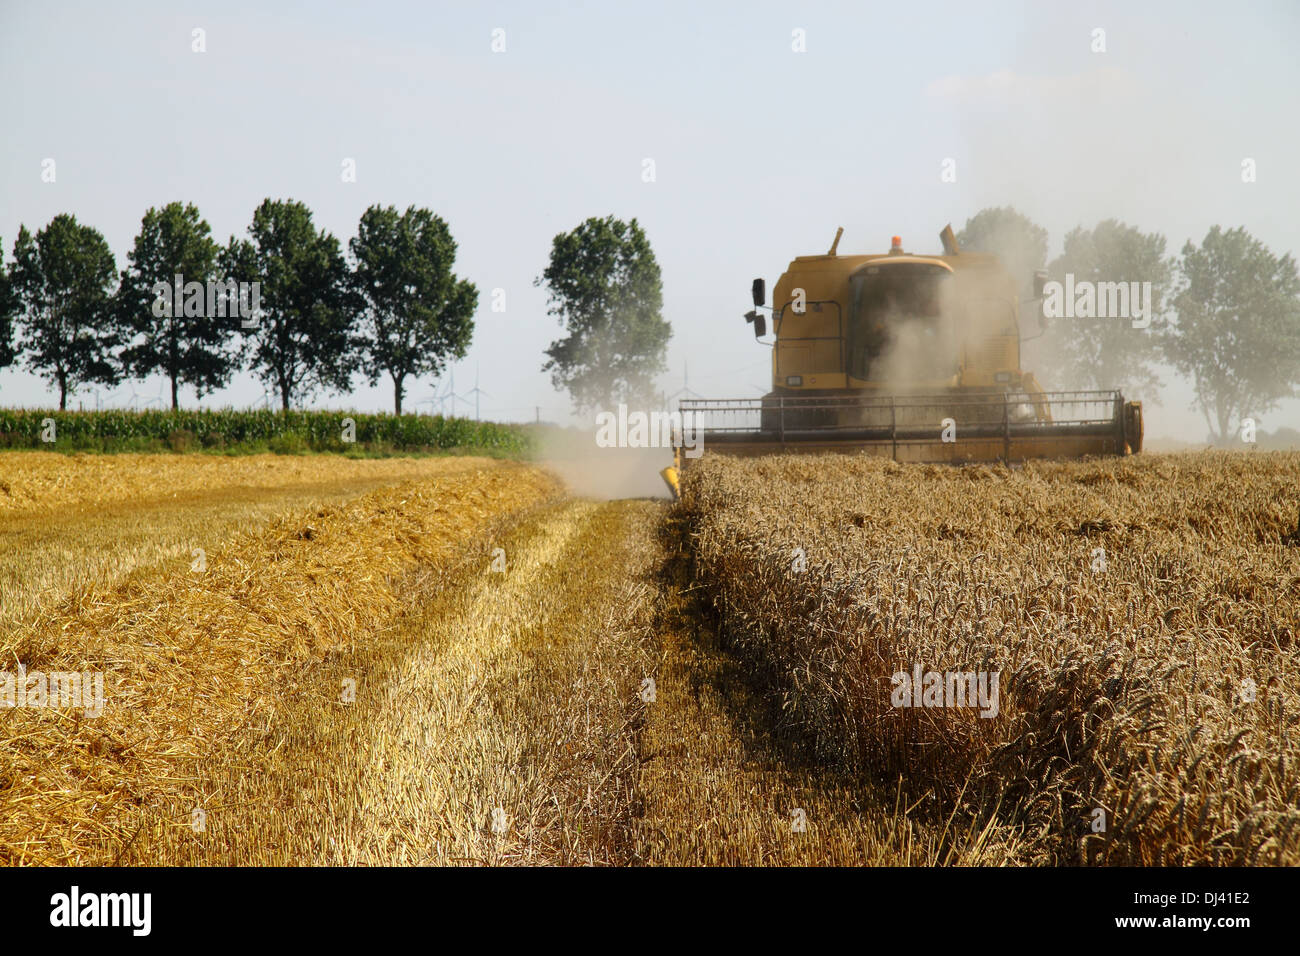 Combines in action Stock Photo